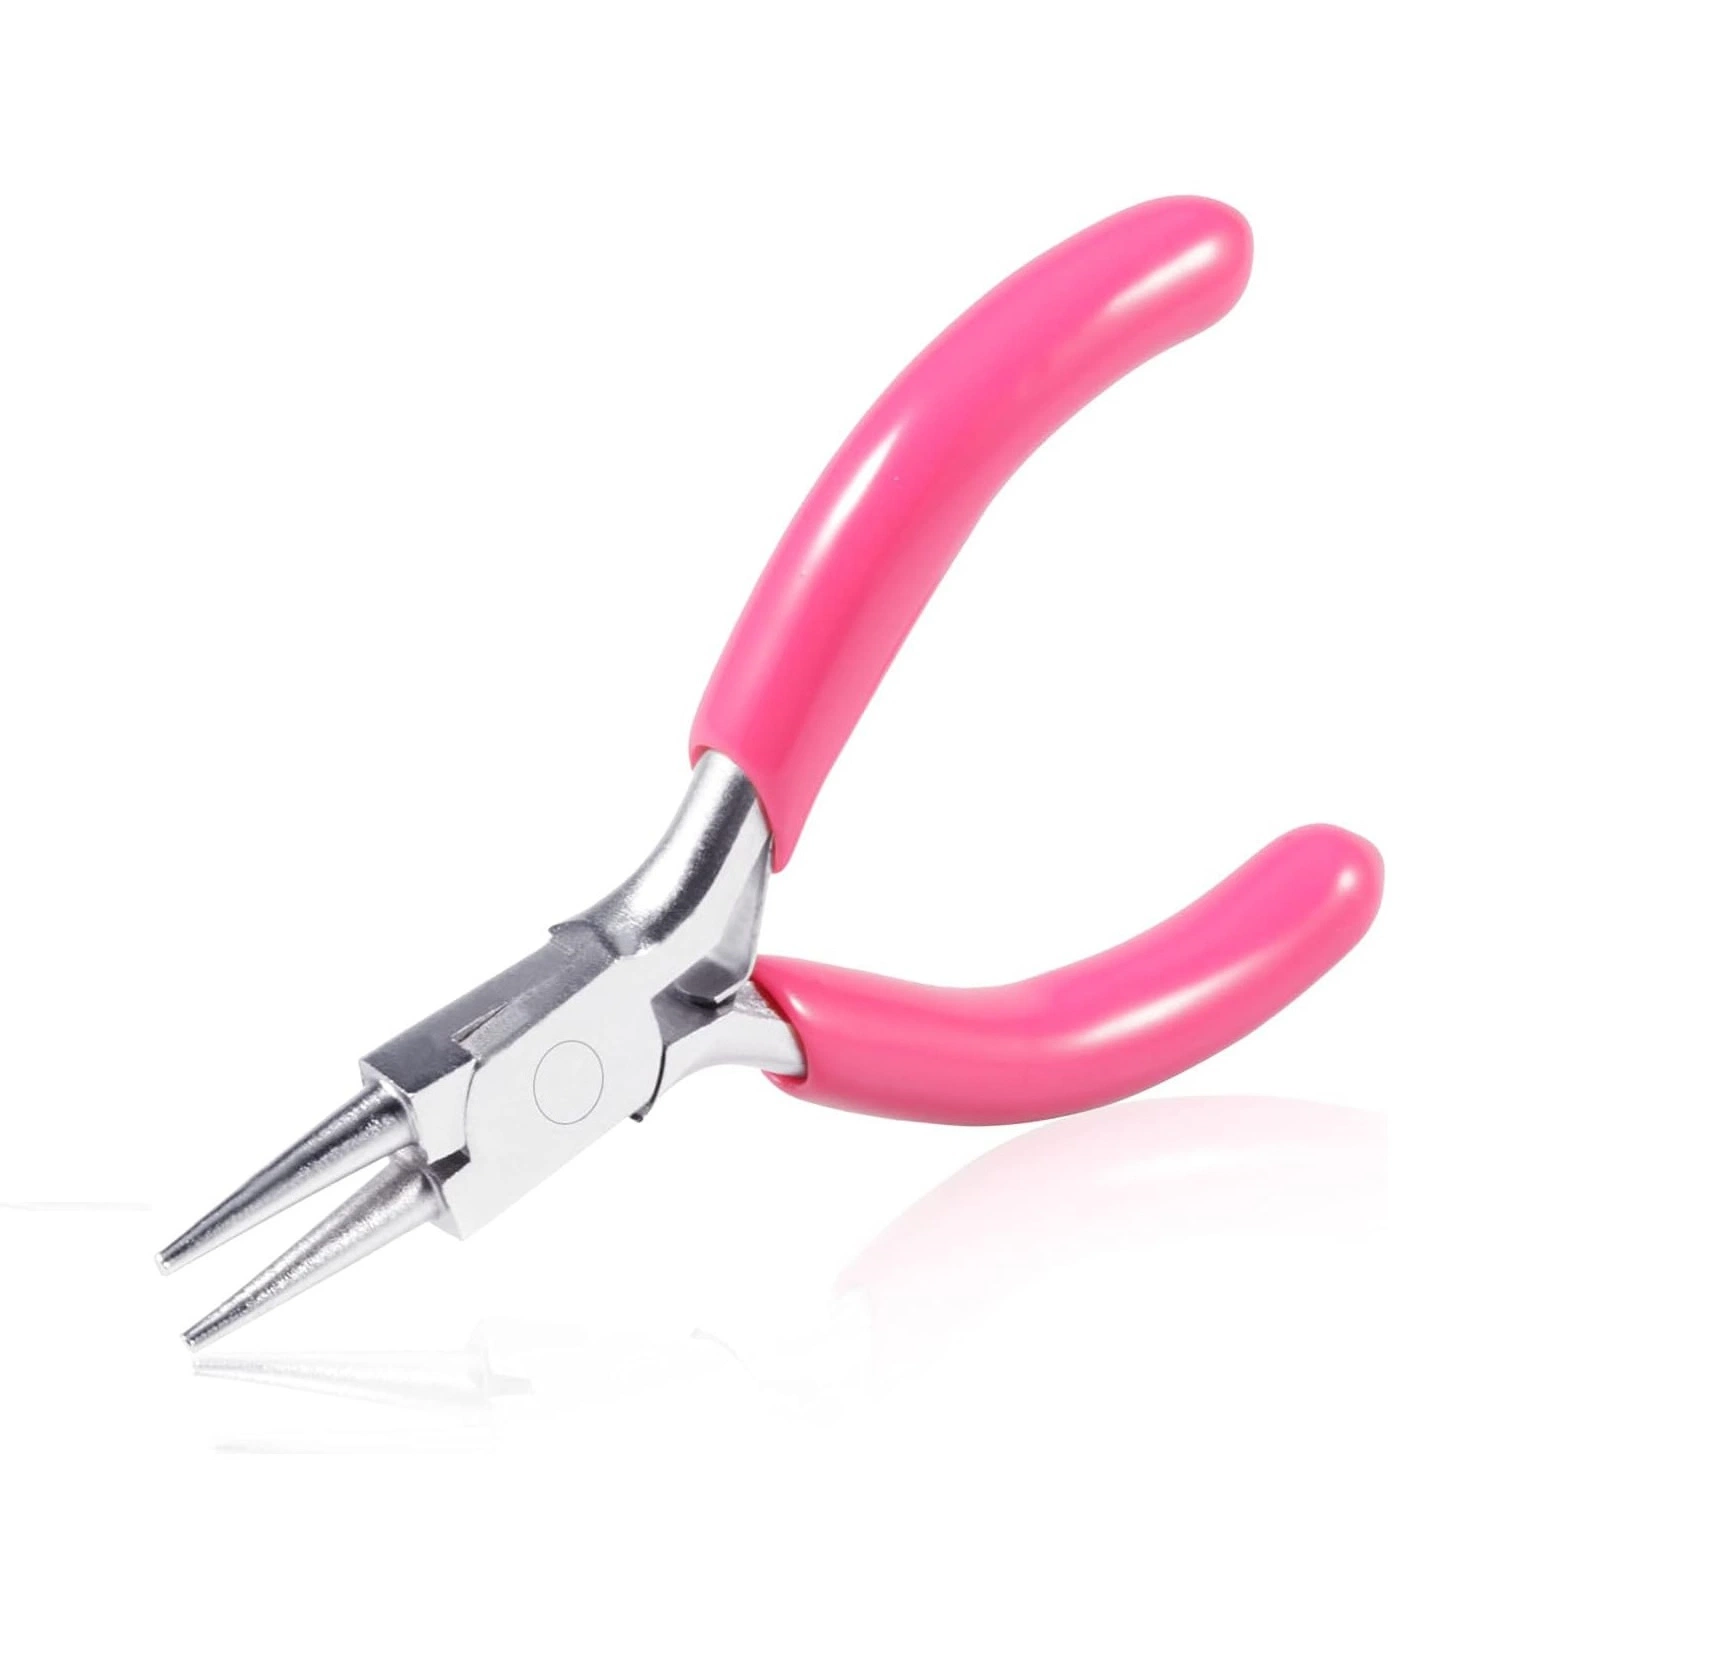 3-Inch Professional Mini Round Nose Tools Pliers with Nickel-Iron Plated for Jewelry Making